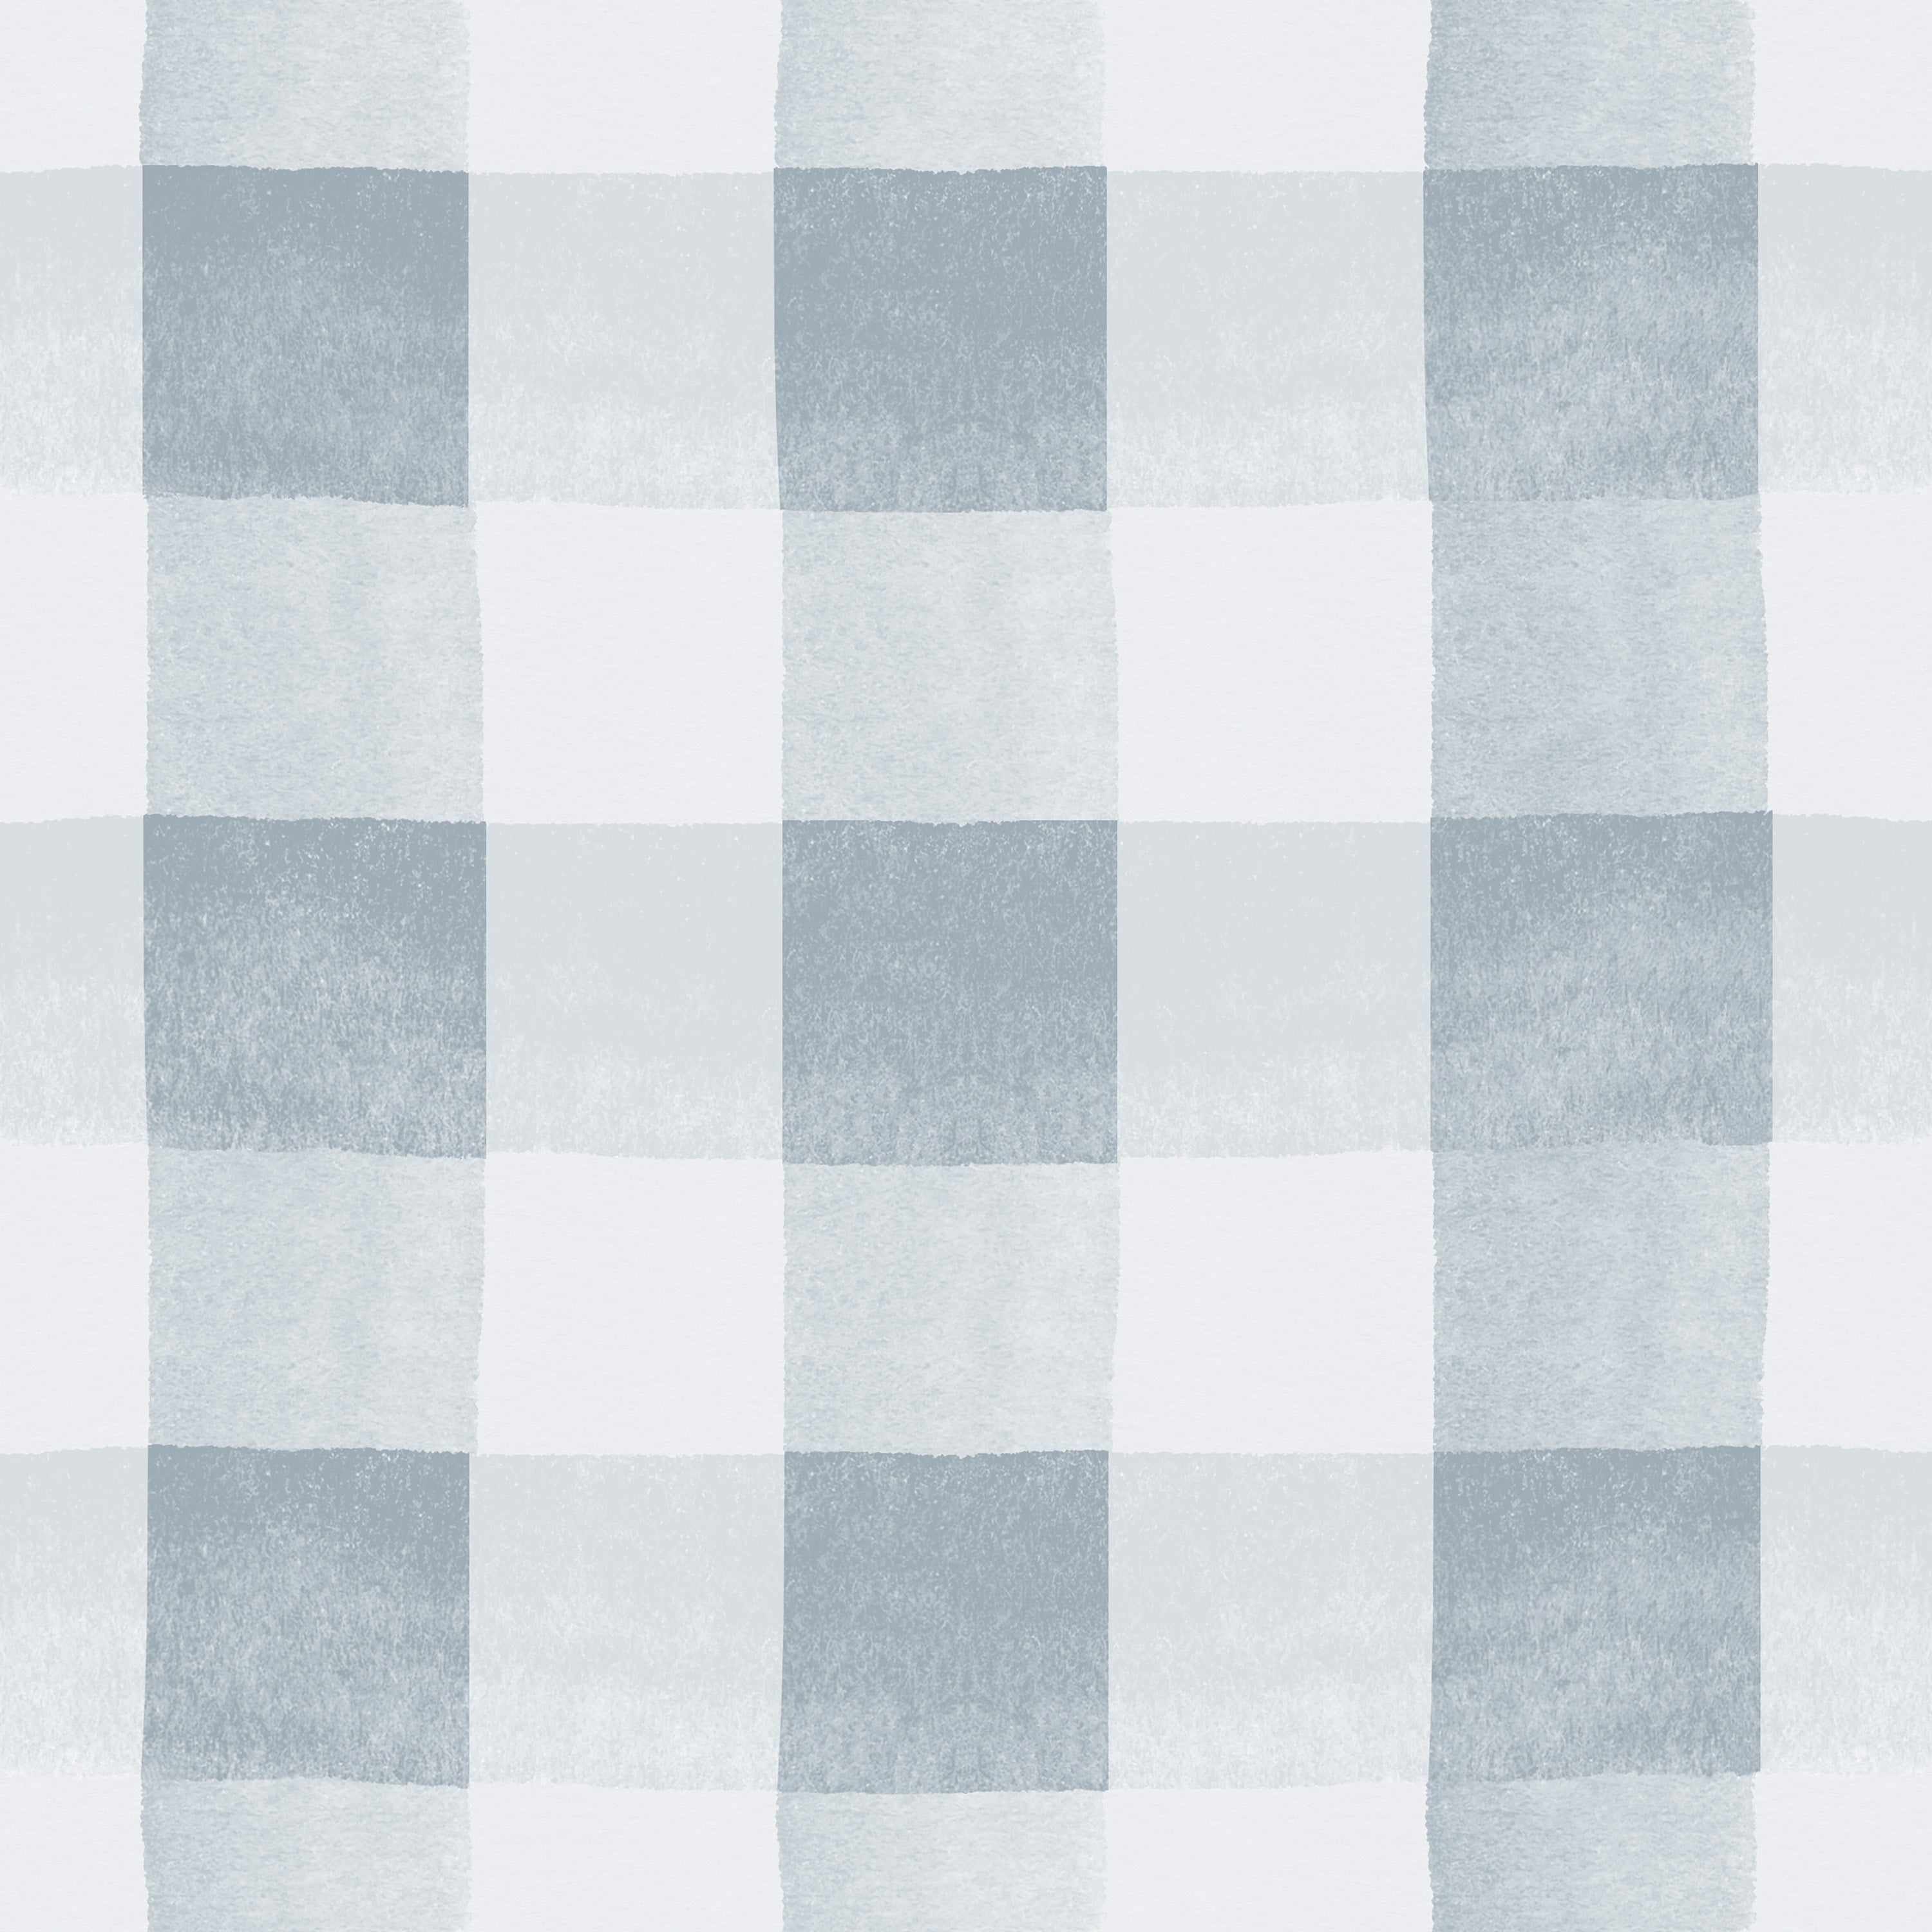 a detailed view of the "Camille Wallpaper - Pale Blue," showing the soft watercolor texture within the checkered design. The shades of pale blue gently transition, creating a soothing and inviting atmosphere. This close-up showcases the gentle brush strokes and the calming color scheme, ideal for creating a peaceful space.